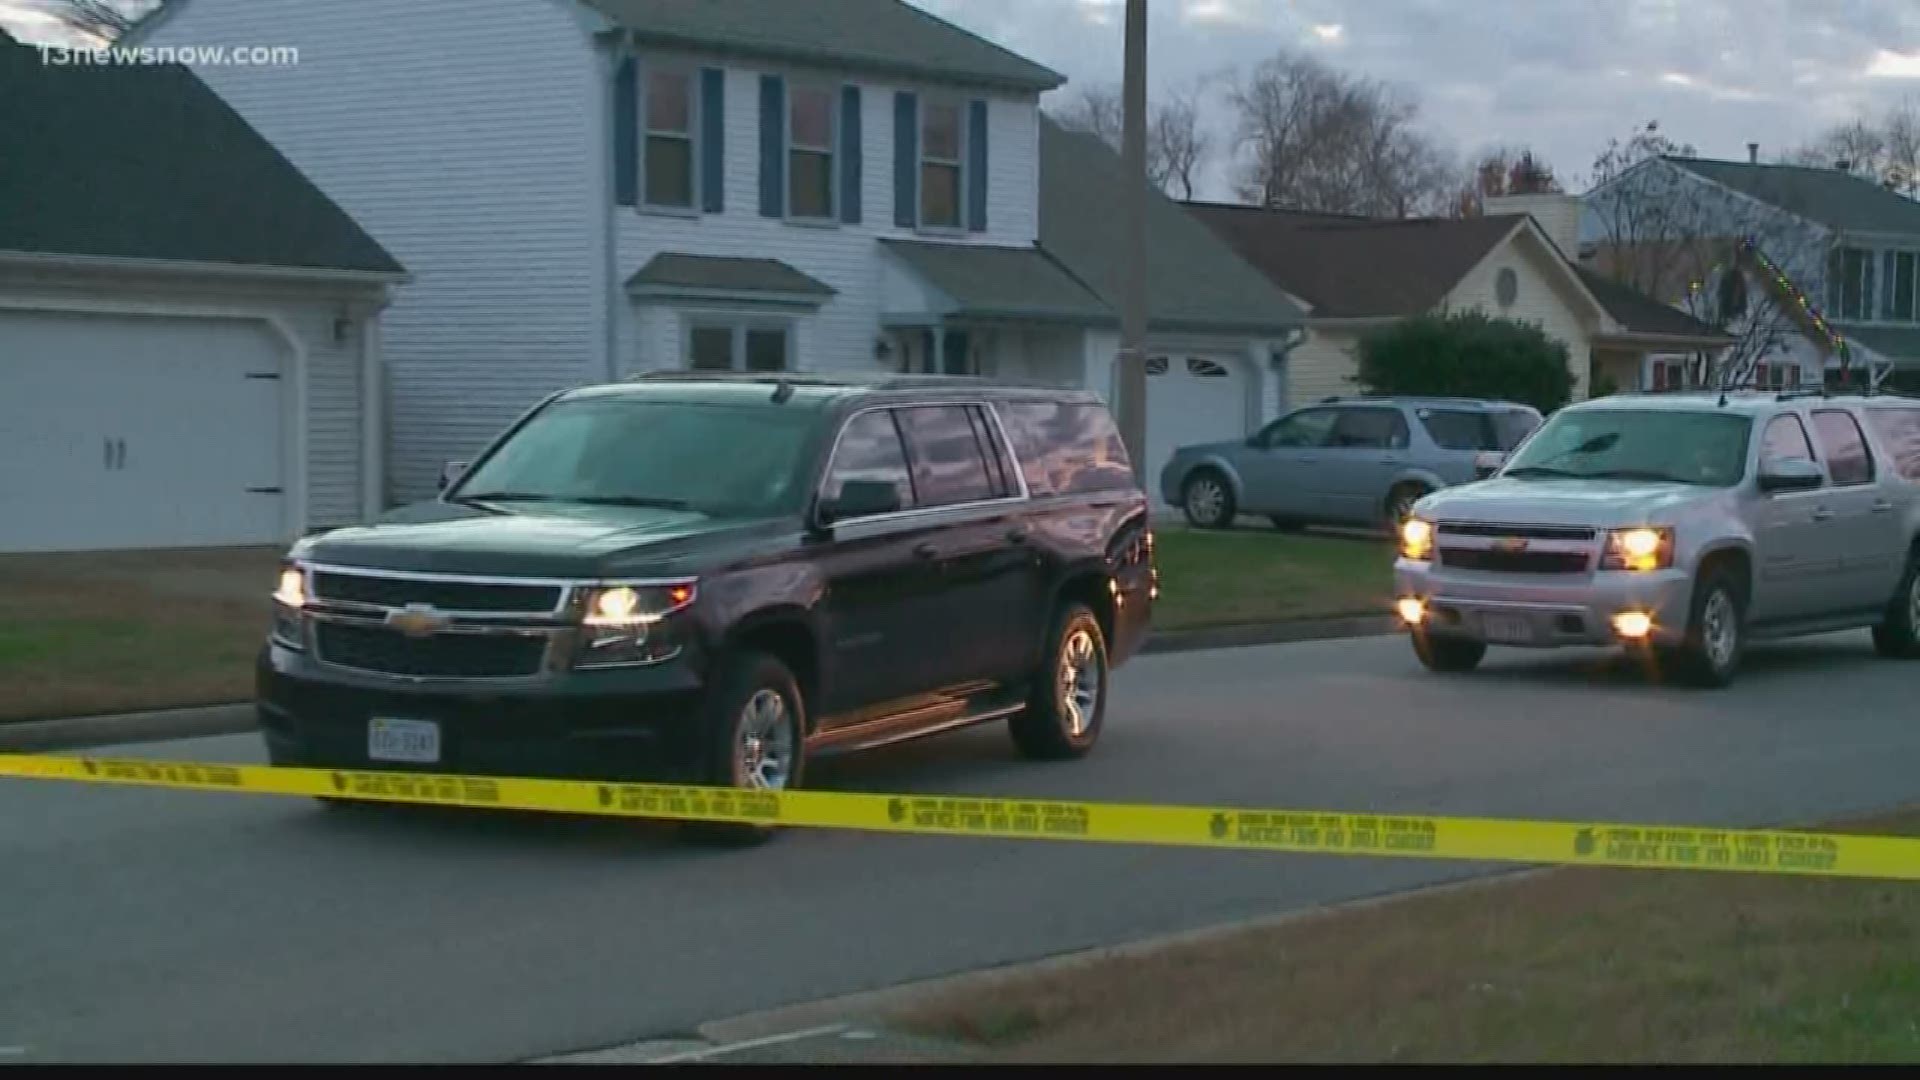 Police are investigating after a man and woman were found dead after shooting on Revelstroke Court in Virginia Beach.